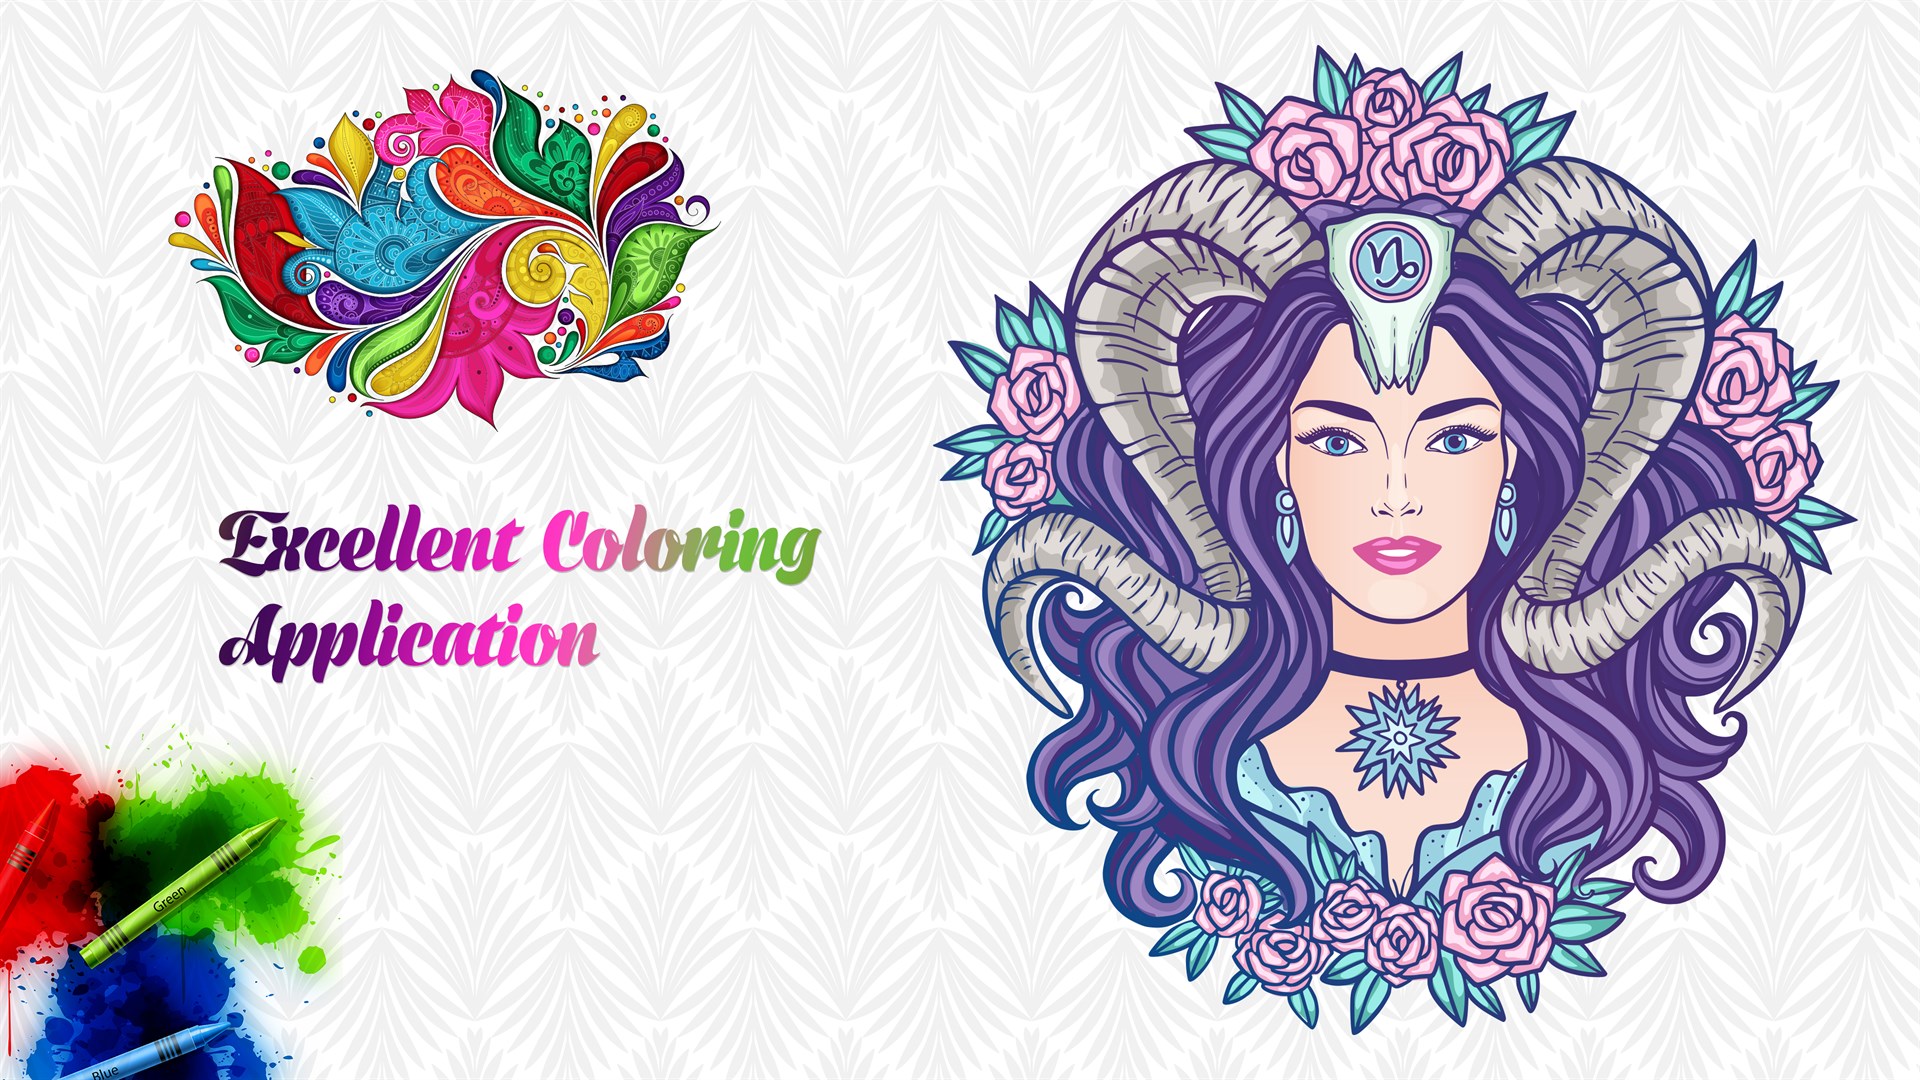 Download Get Adult Coloring Book With Multiple Templates & Colors - Microsoft Store